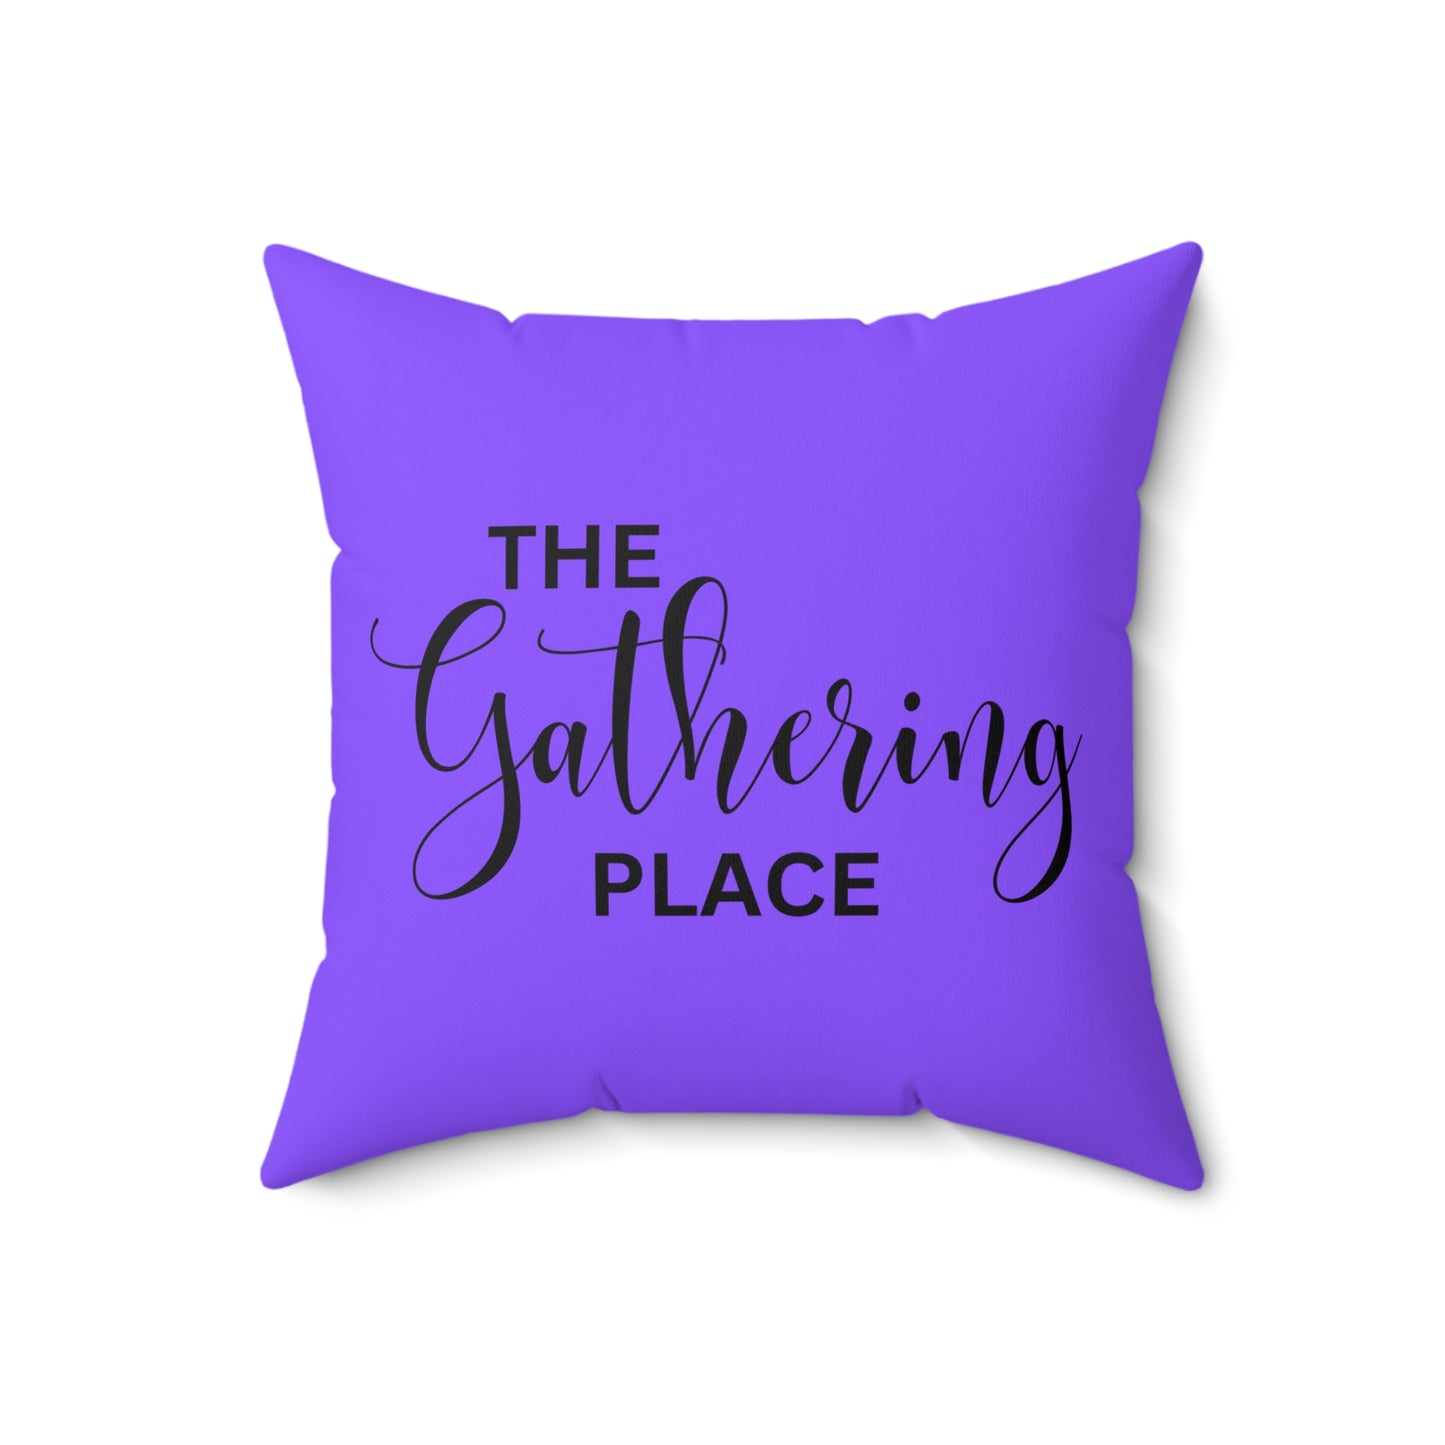 "The Gathering Place" Throw Pillow